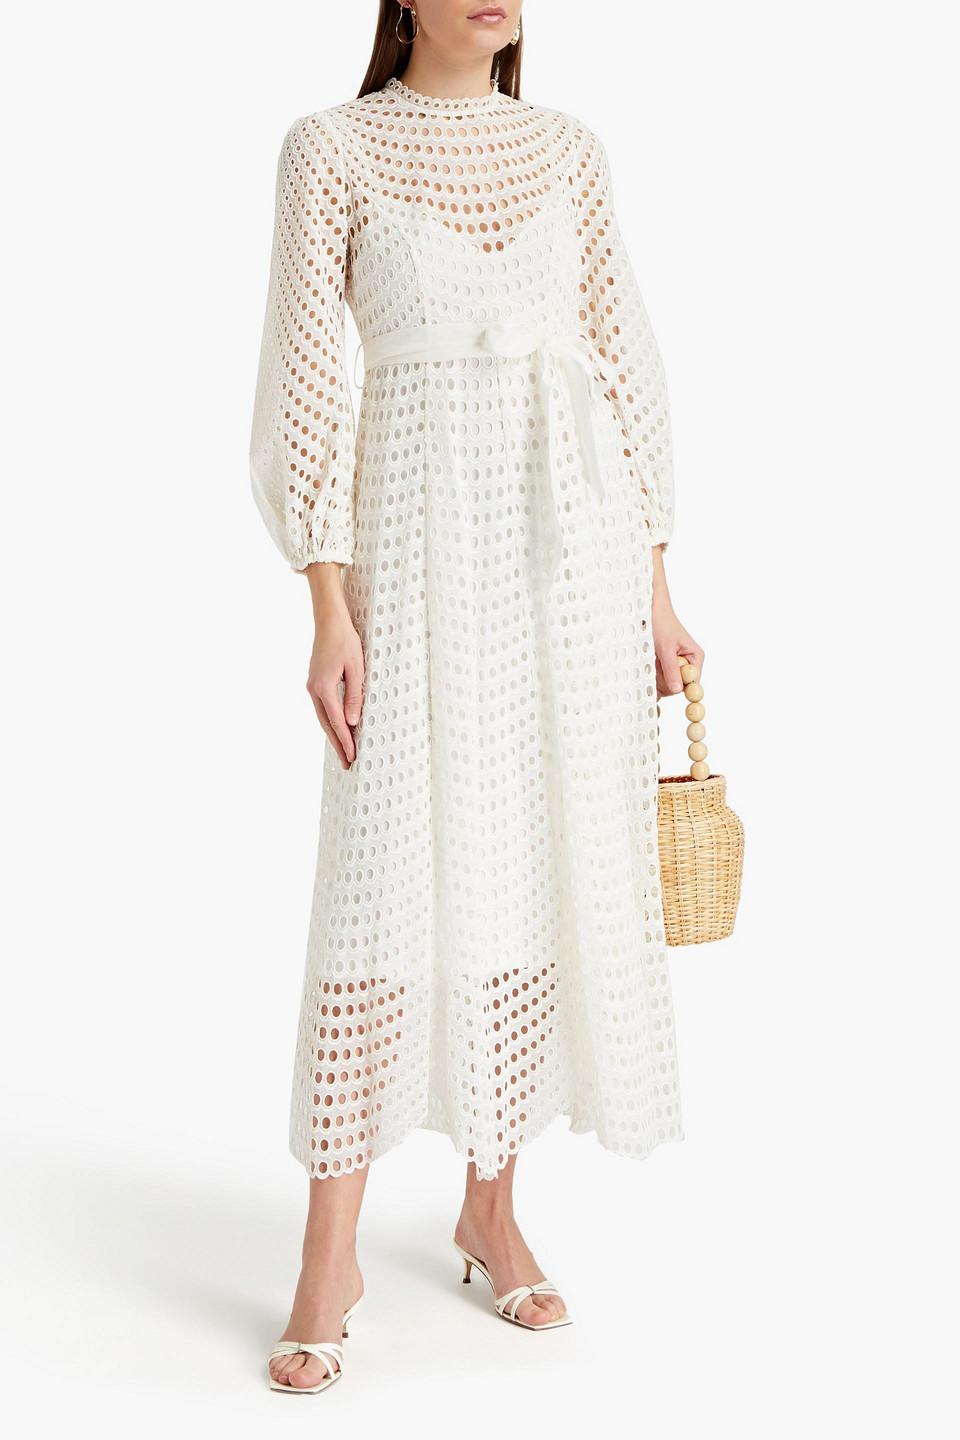 Zimmermann Poppy Floral-print Broderie Anglaise Midi Dress in Ivory (White)  | Lyst